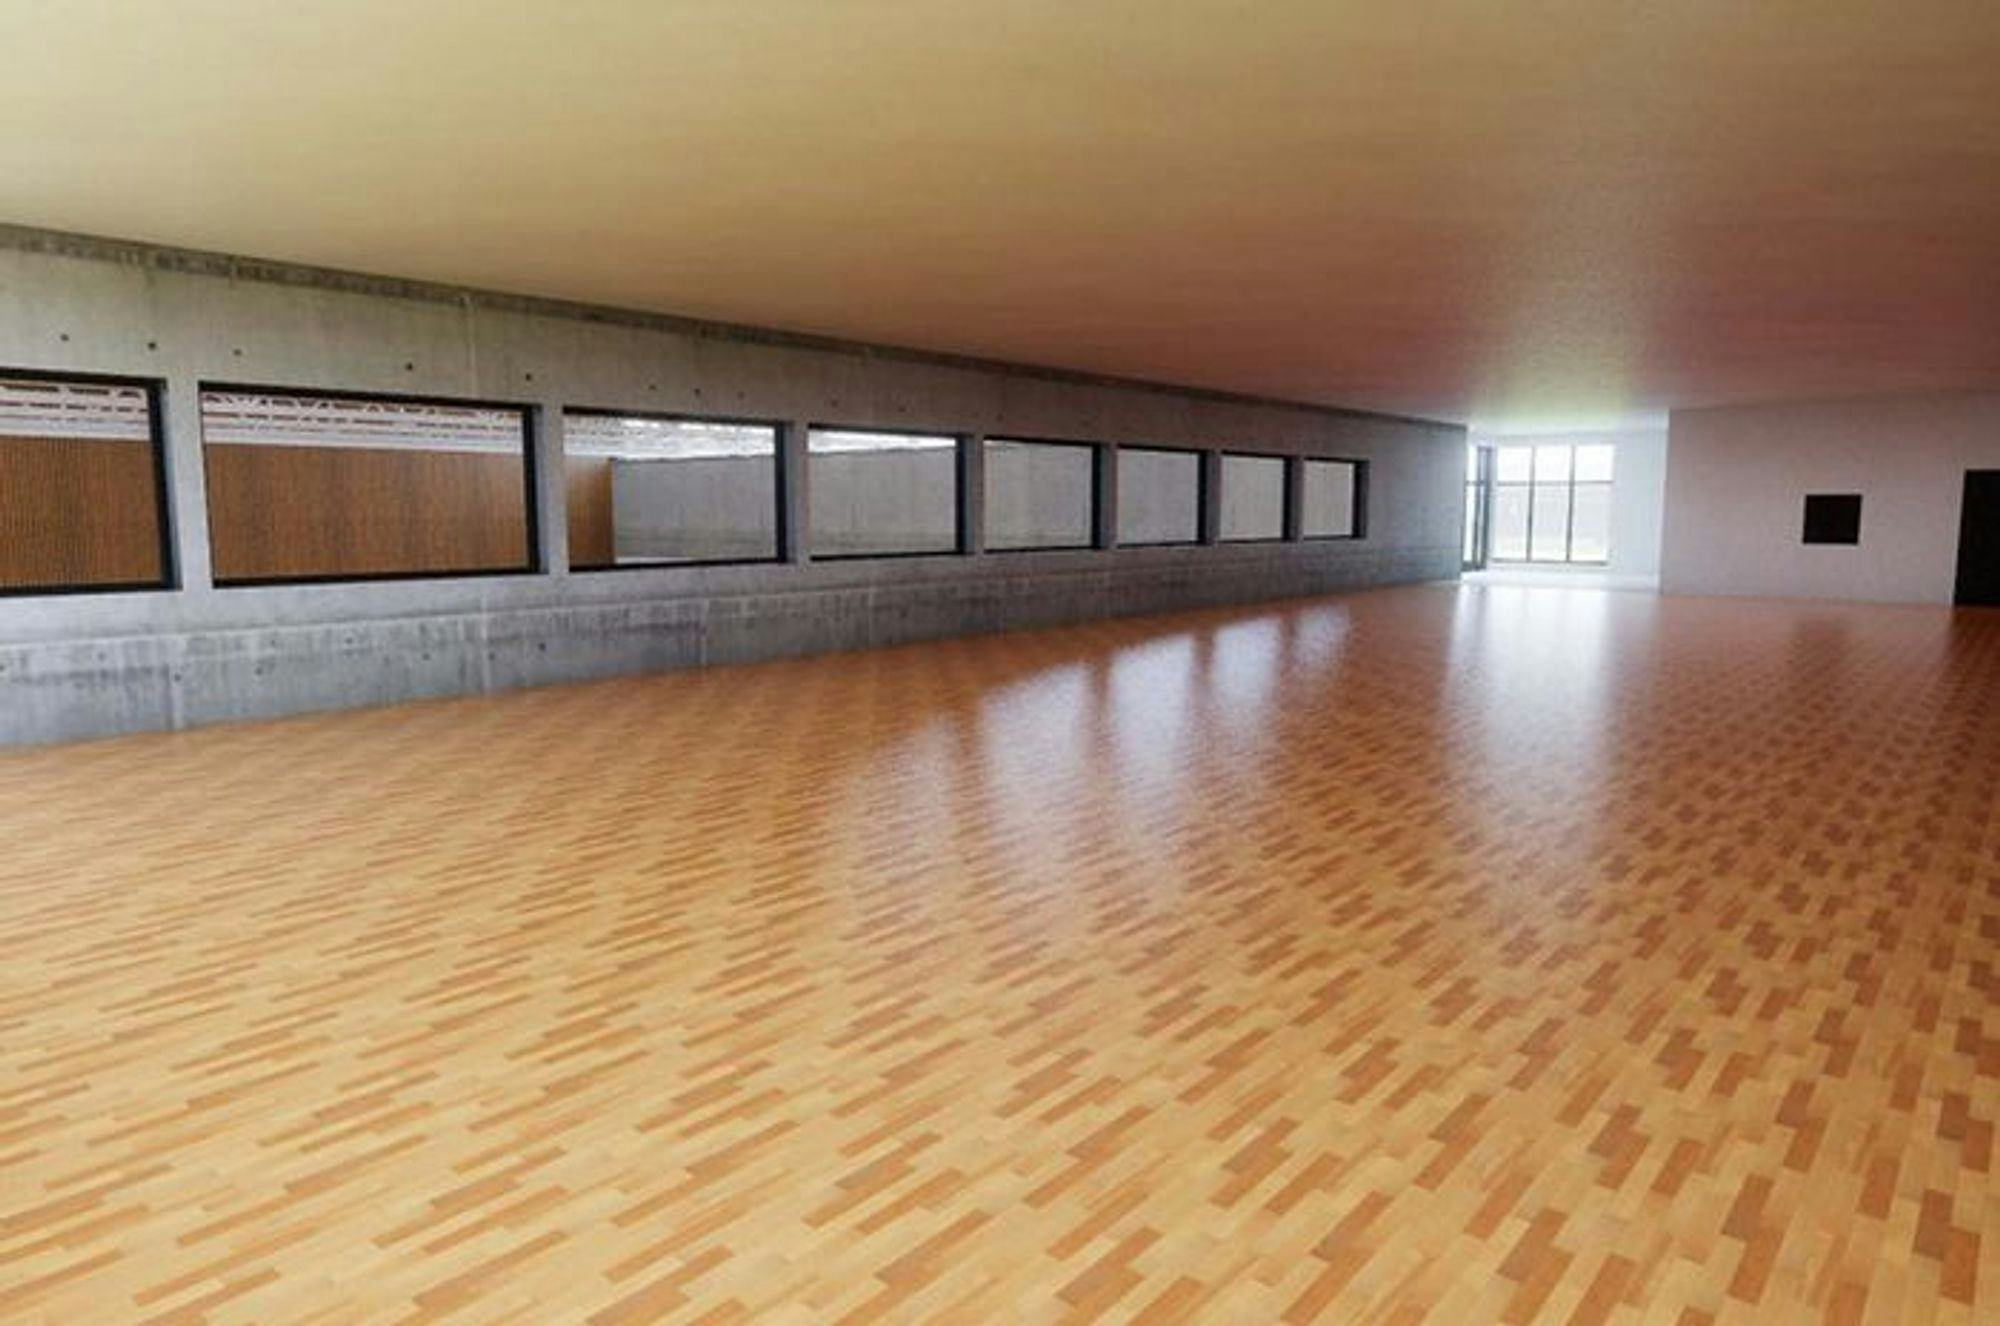 A spacious hall with a polished wooden floor and series of windows 